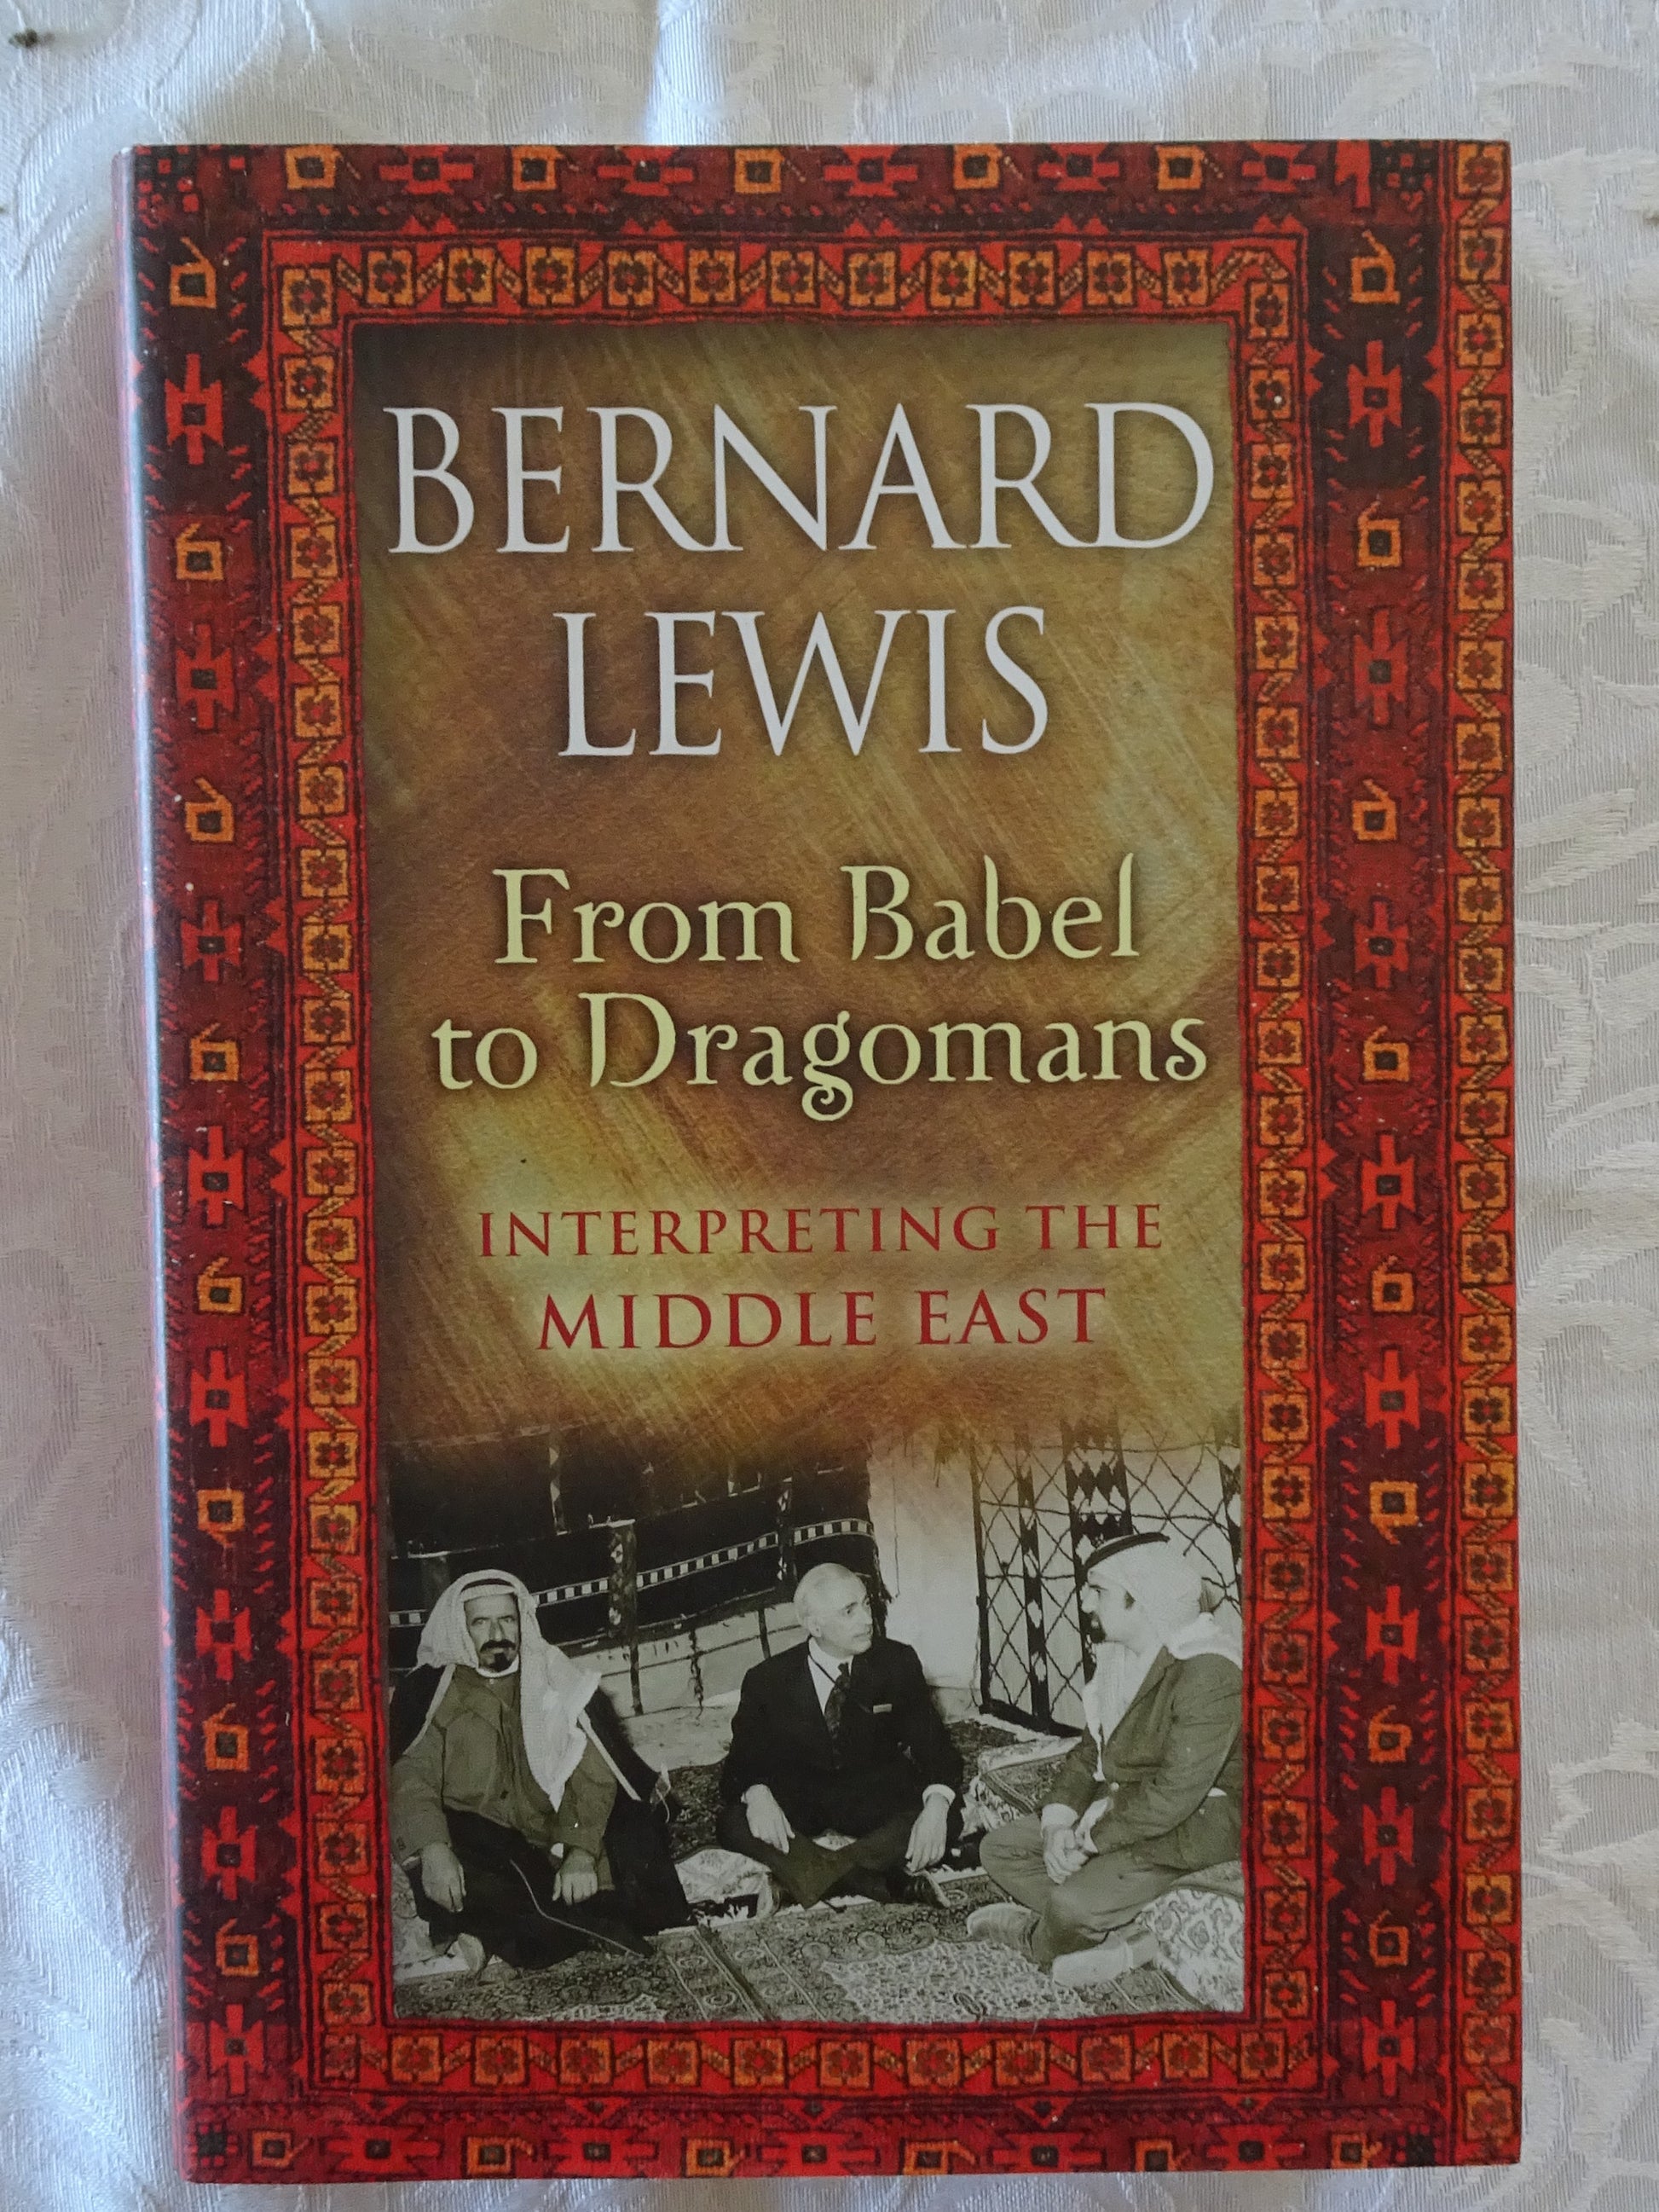 From Babel to Dragomans  Interpreting the Middle East  by Bernard Lewis